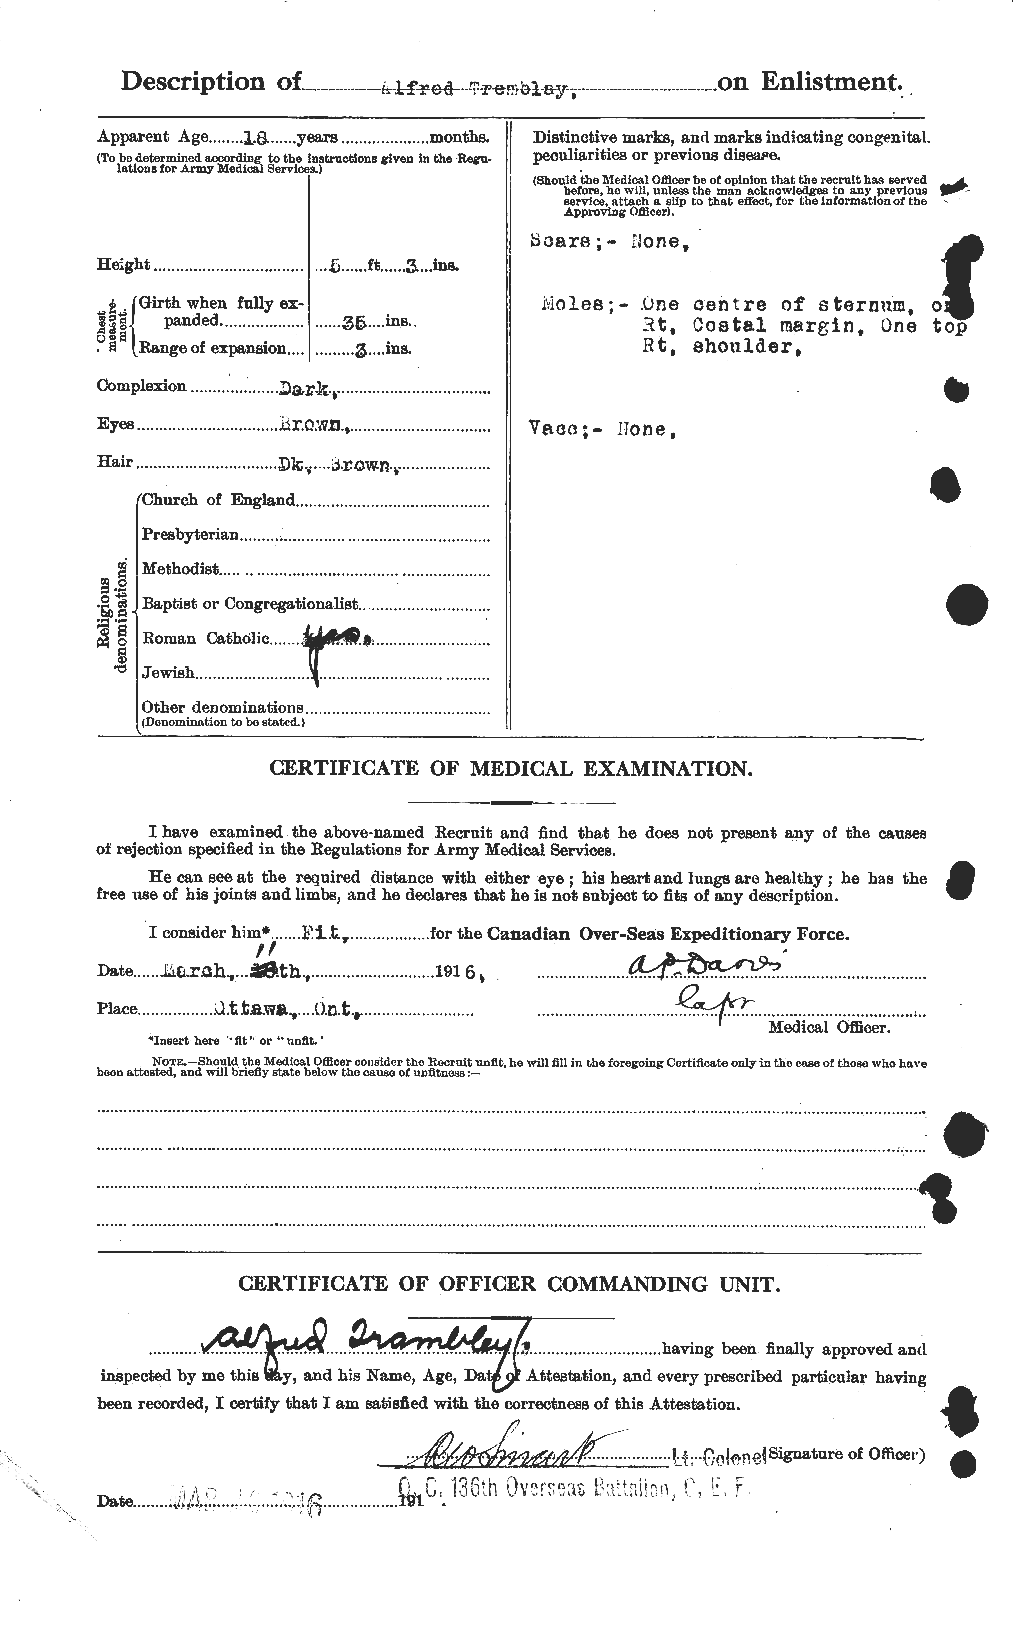 Personnel Records of the First World War - CEF 638918b